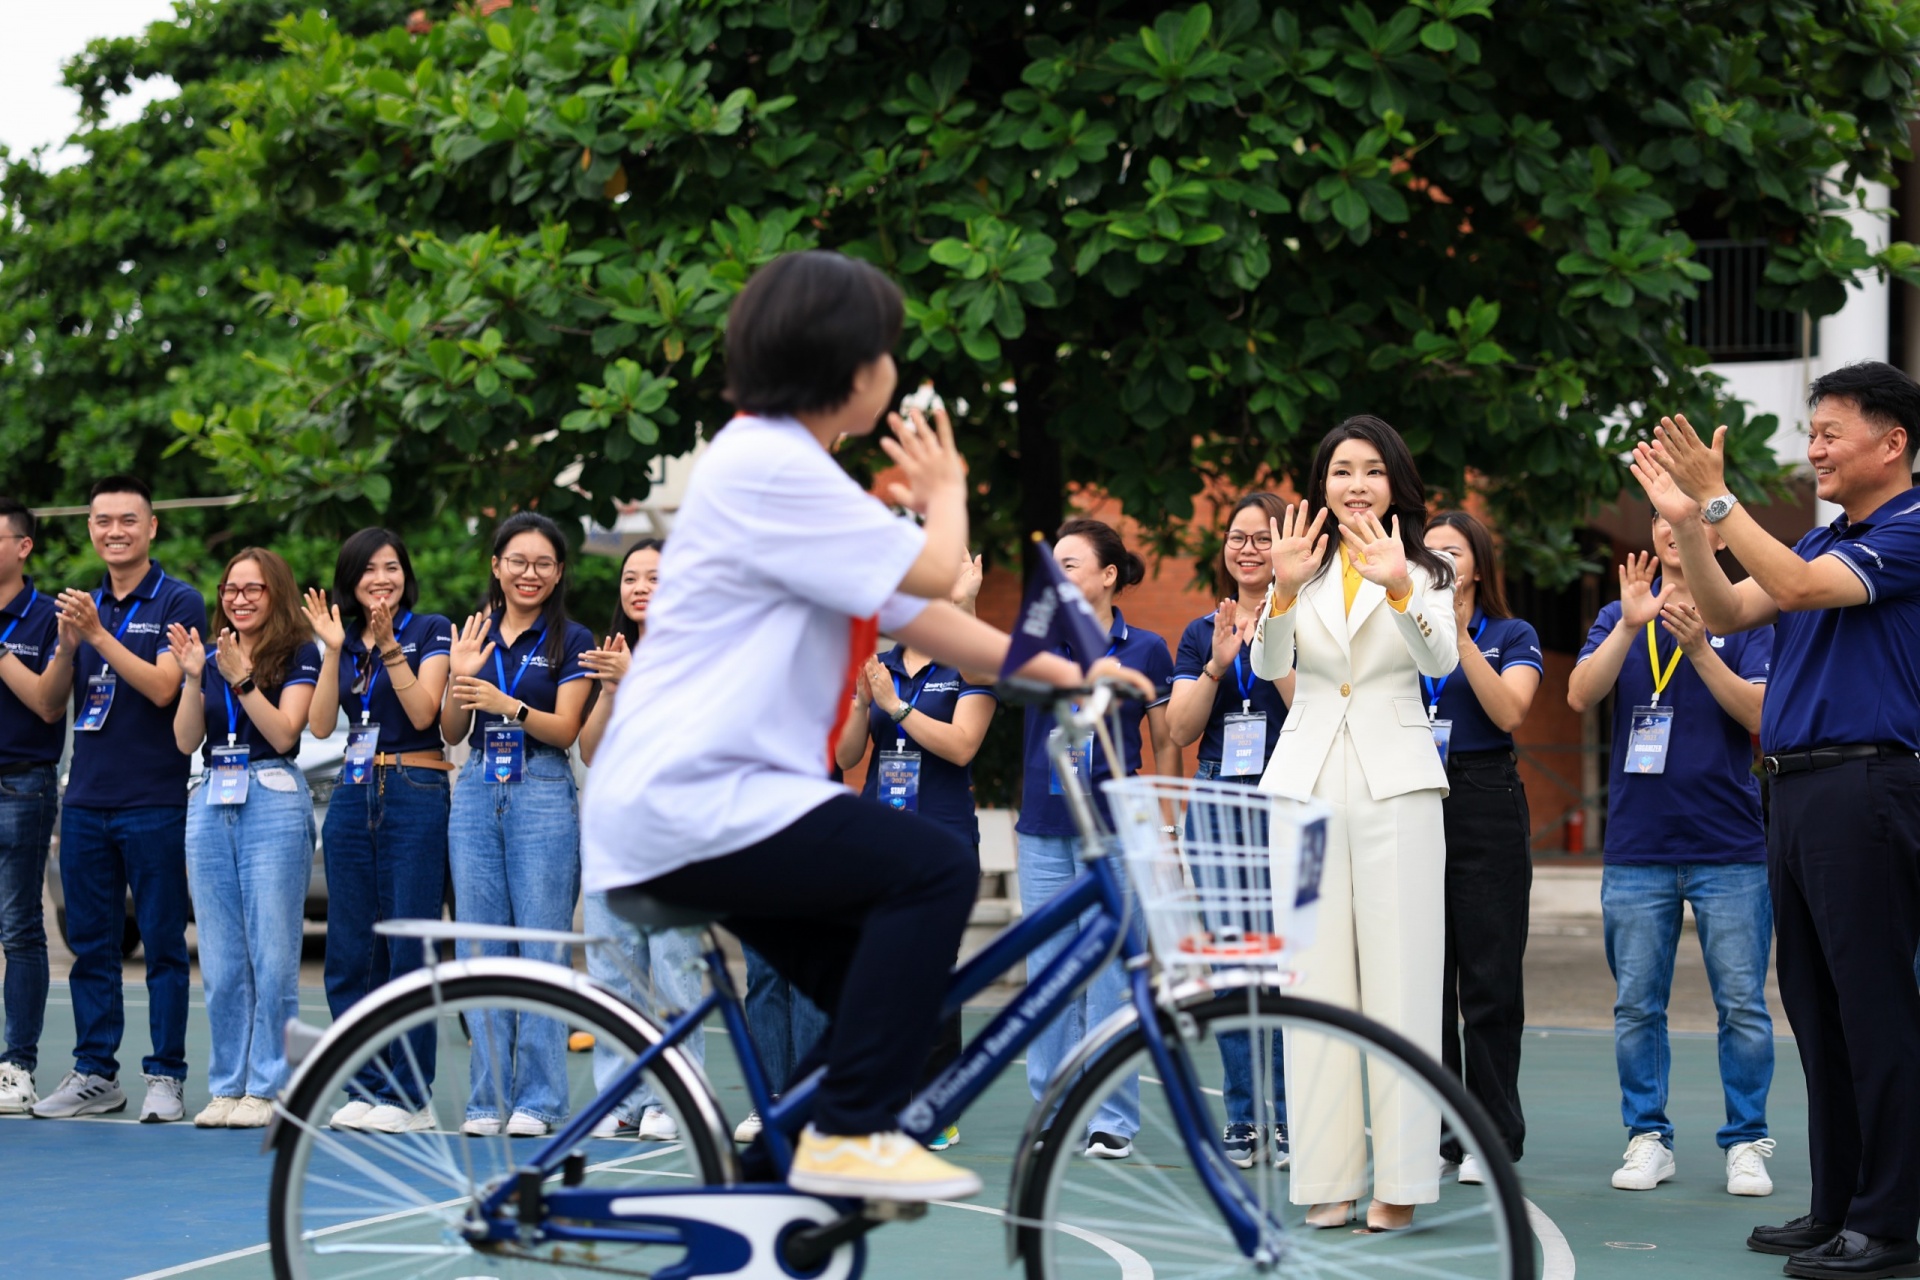 Shinhan Bank Vietnam organised “Bike Run” event to present bicycles and scholarships to students at SOS Children’s Village Vietnam, attended by the First Lady of the Republic Korea